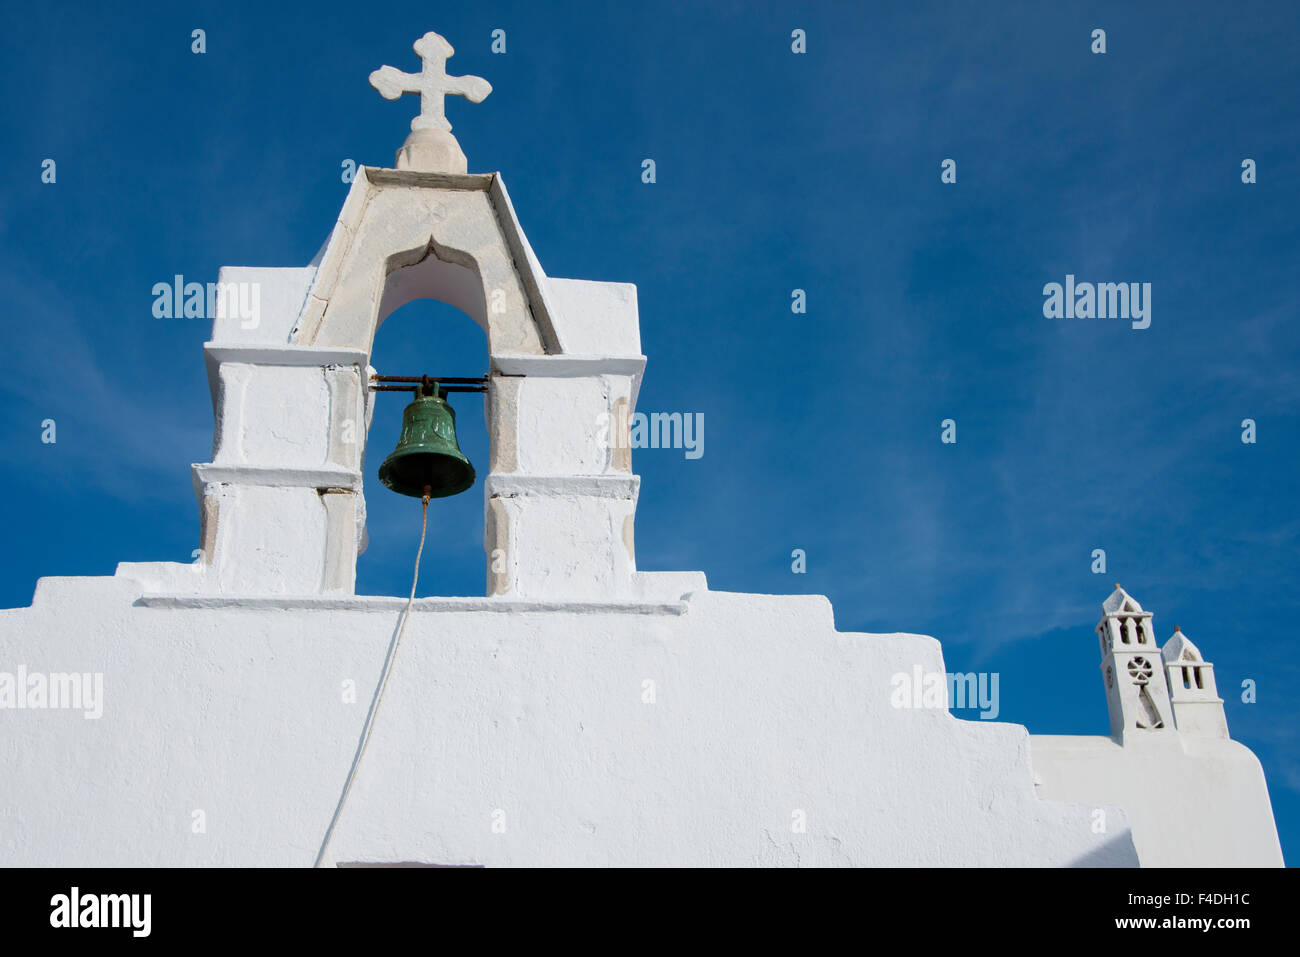 Greece, Cyclades, Mykonos, Hora. Typical whitewashed church rooftop with bell (circa 1811) tower showing traditional Cycladic architecture. (Large format sizes available). Stock Photo